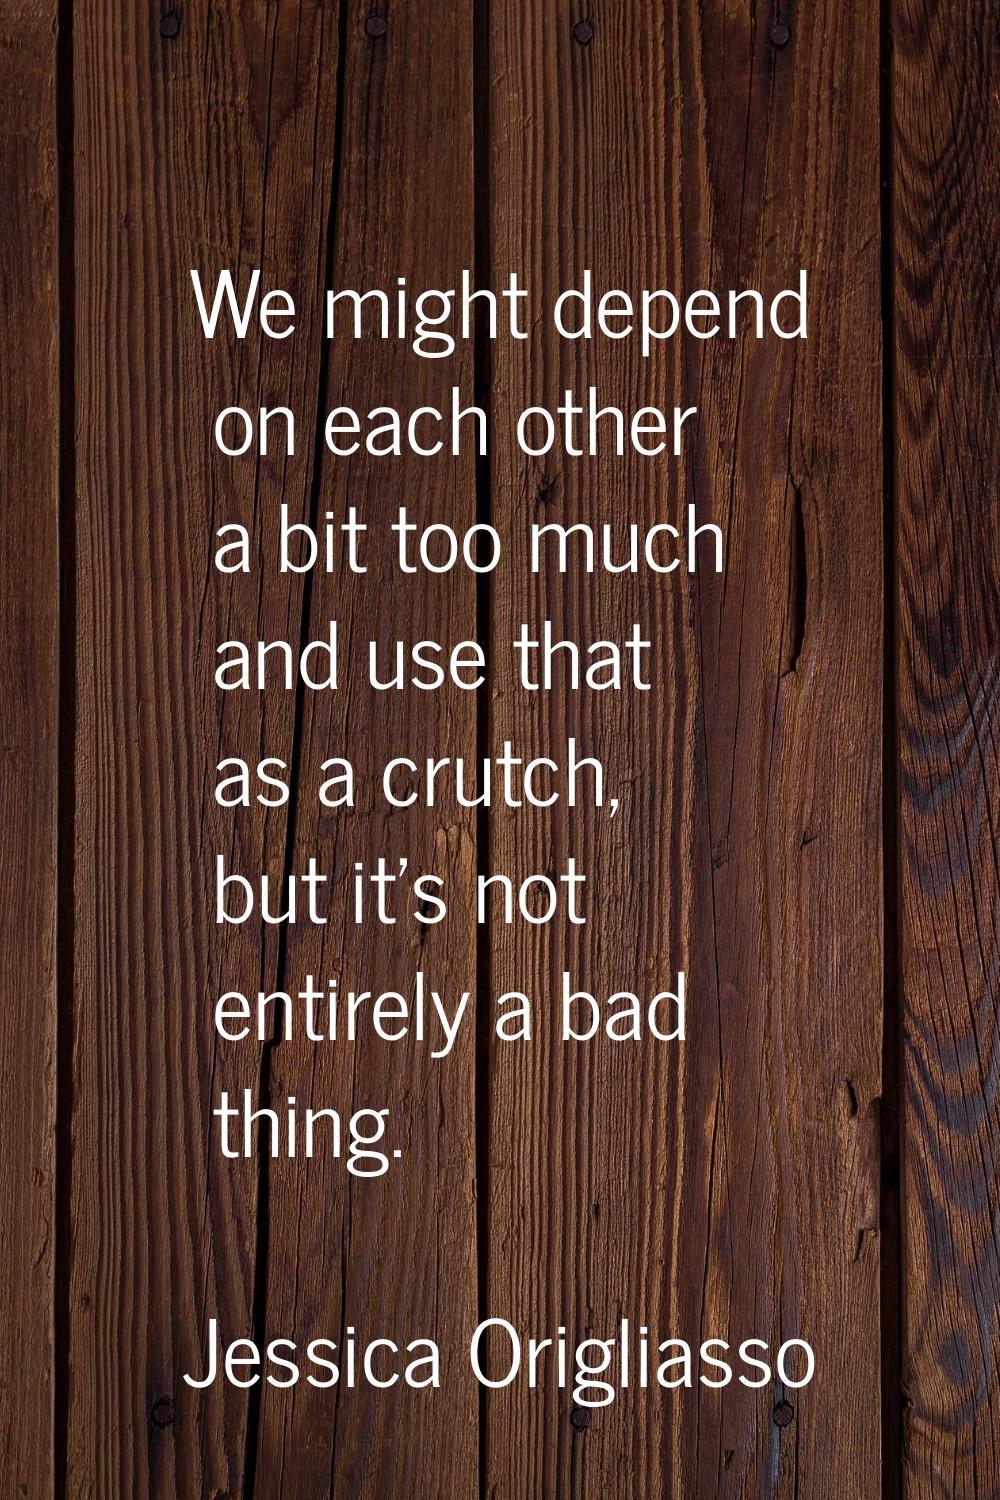 We might depend on each other a bit too much and use that as a crutch, but it's not entirely a bad 